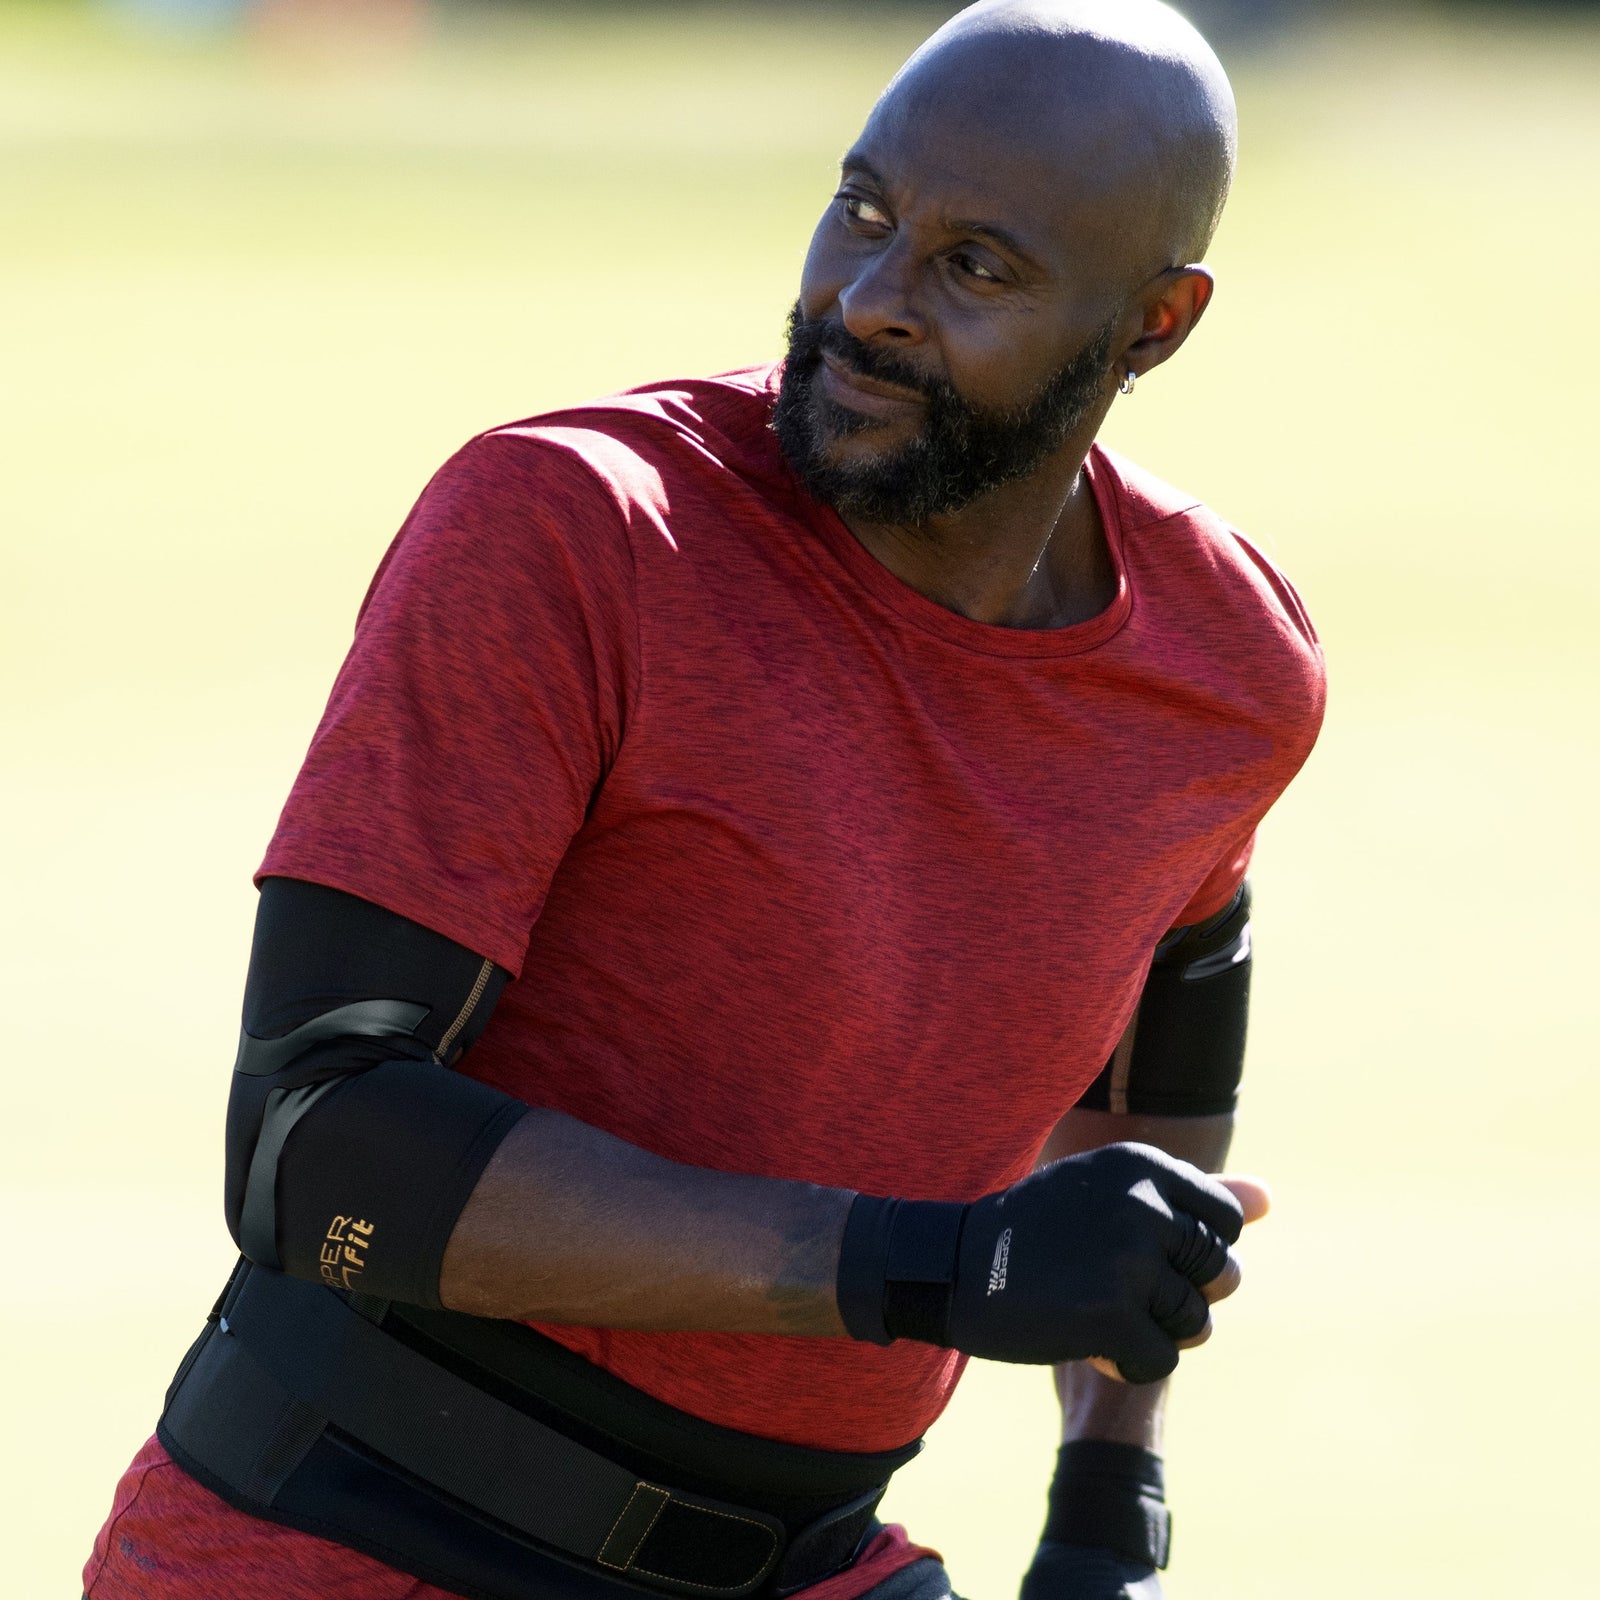 https://cdn.shopify.com/s/files/1/0578/3938/6778/products/PRO-Elbow-sleeve-Jerry-Rice_1_1600x.jpg?v=1662129861